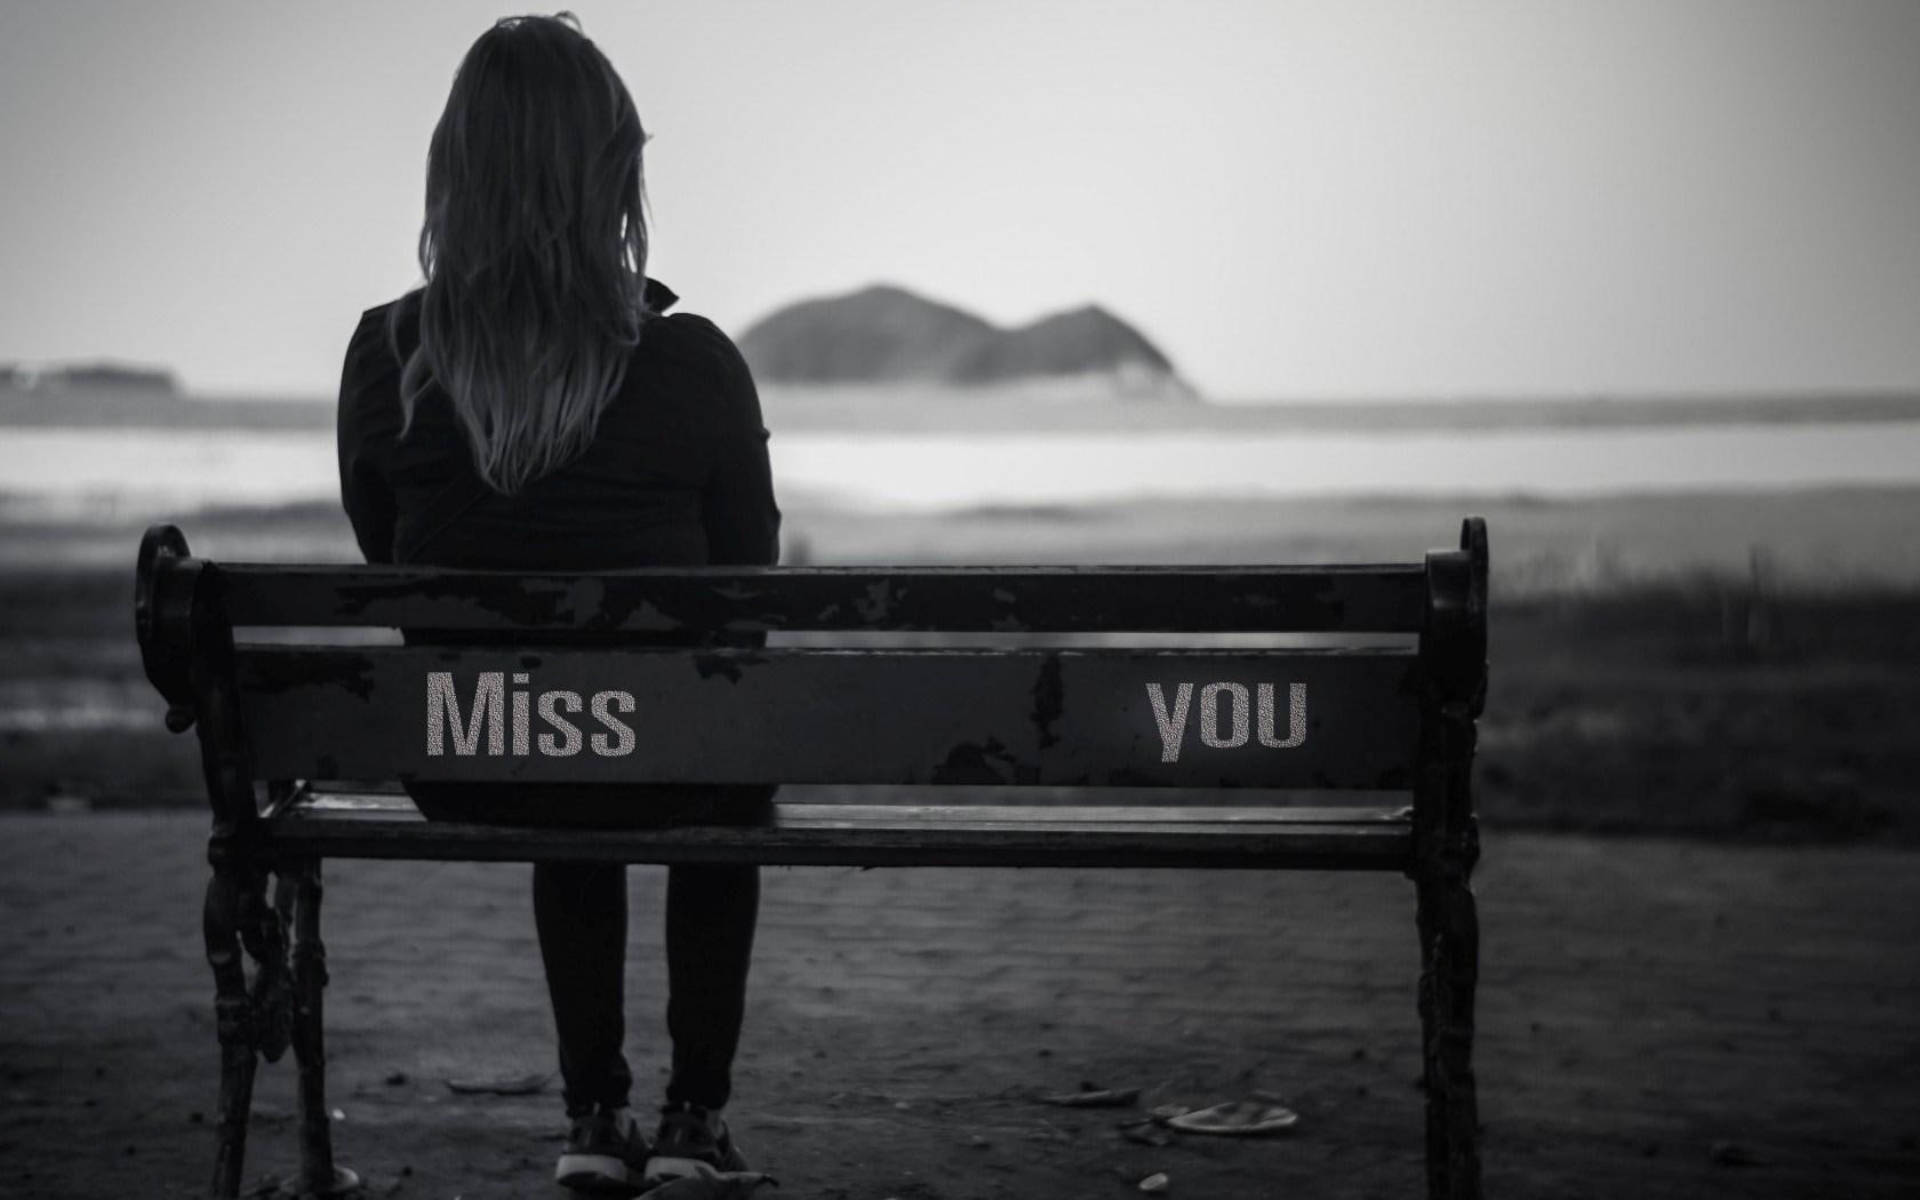 Missing You Alone On Bench